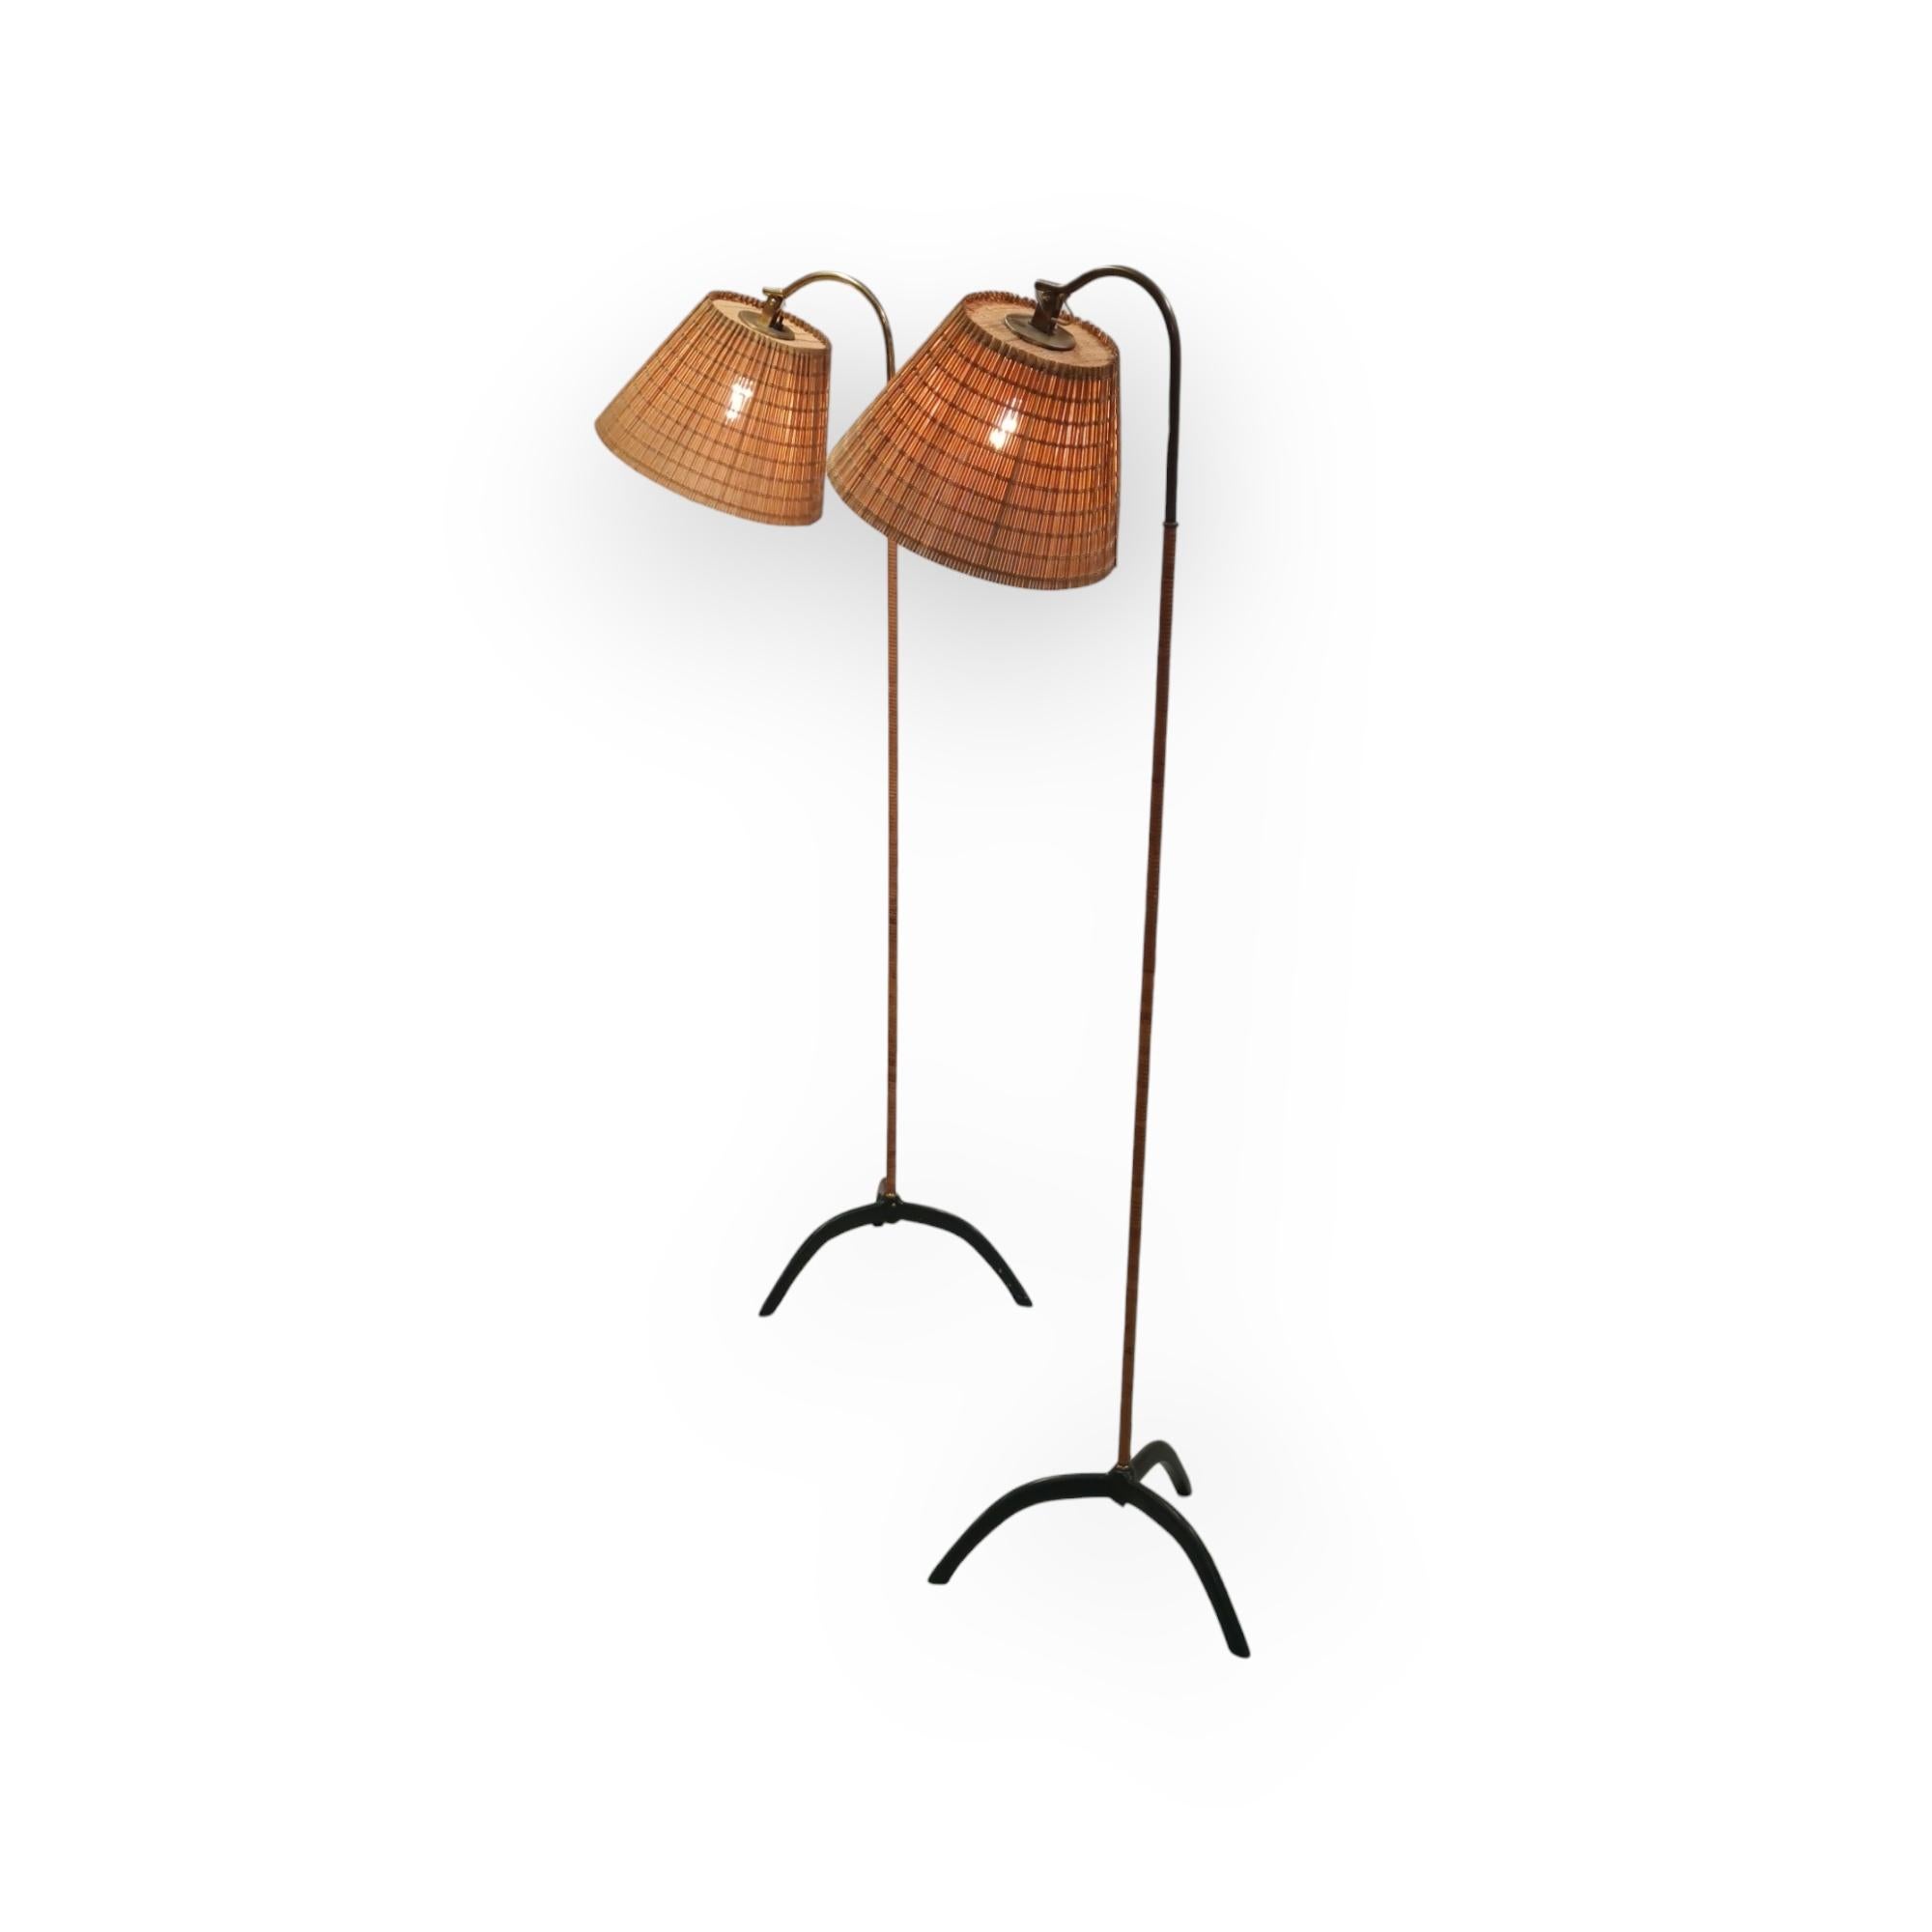 A Pair of Paavo Tynell Floor Lamps model. 9609, Taito Oy 5